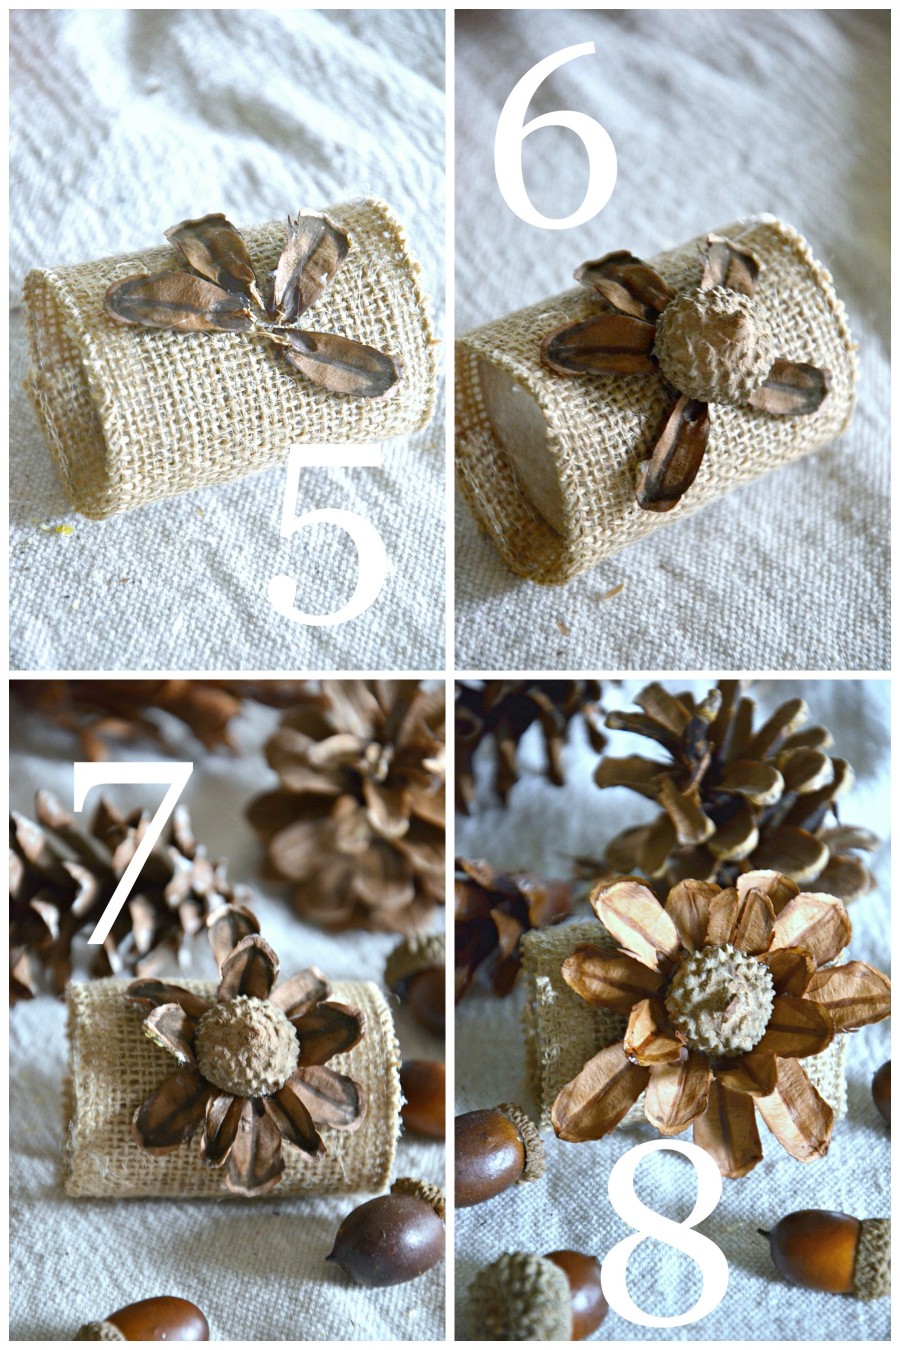 PINECONE AND ACORN FLOWER NAPKIN RINGS-Anyone can make these gorgeous, organic napkin rings with a toilet paper roll, a scrap of burlap and some organic bit and pieces!